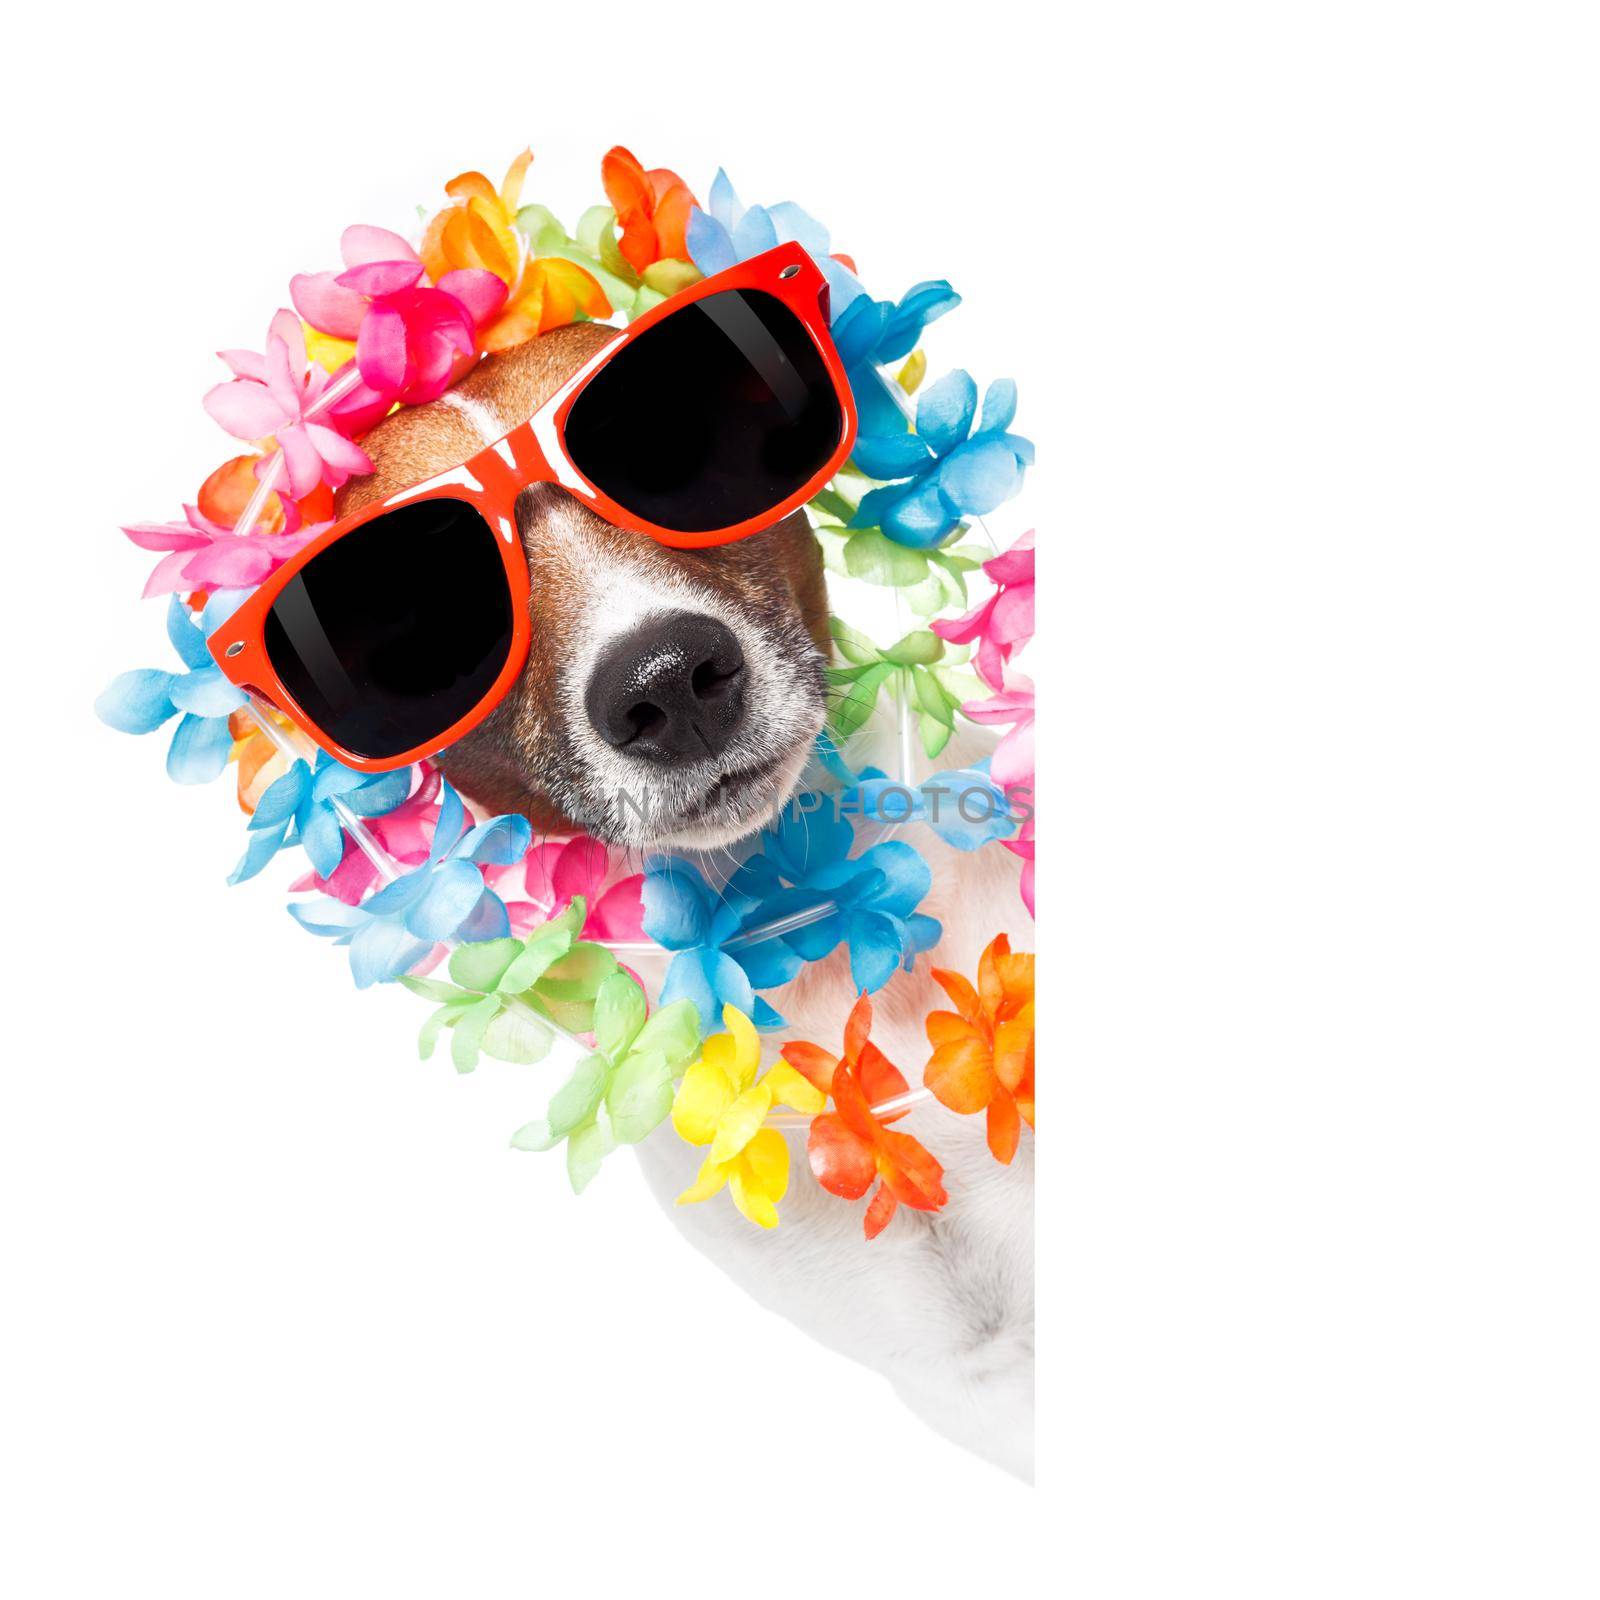 funny jack russell dog wirhg  hawaiian  lei and sunglasses with white banner isolated on white background